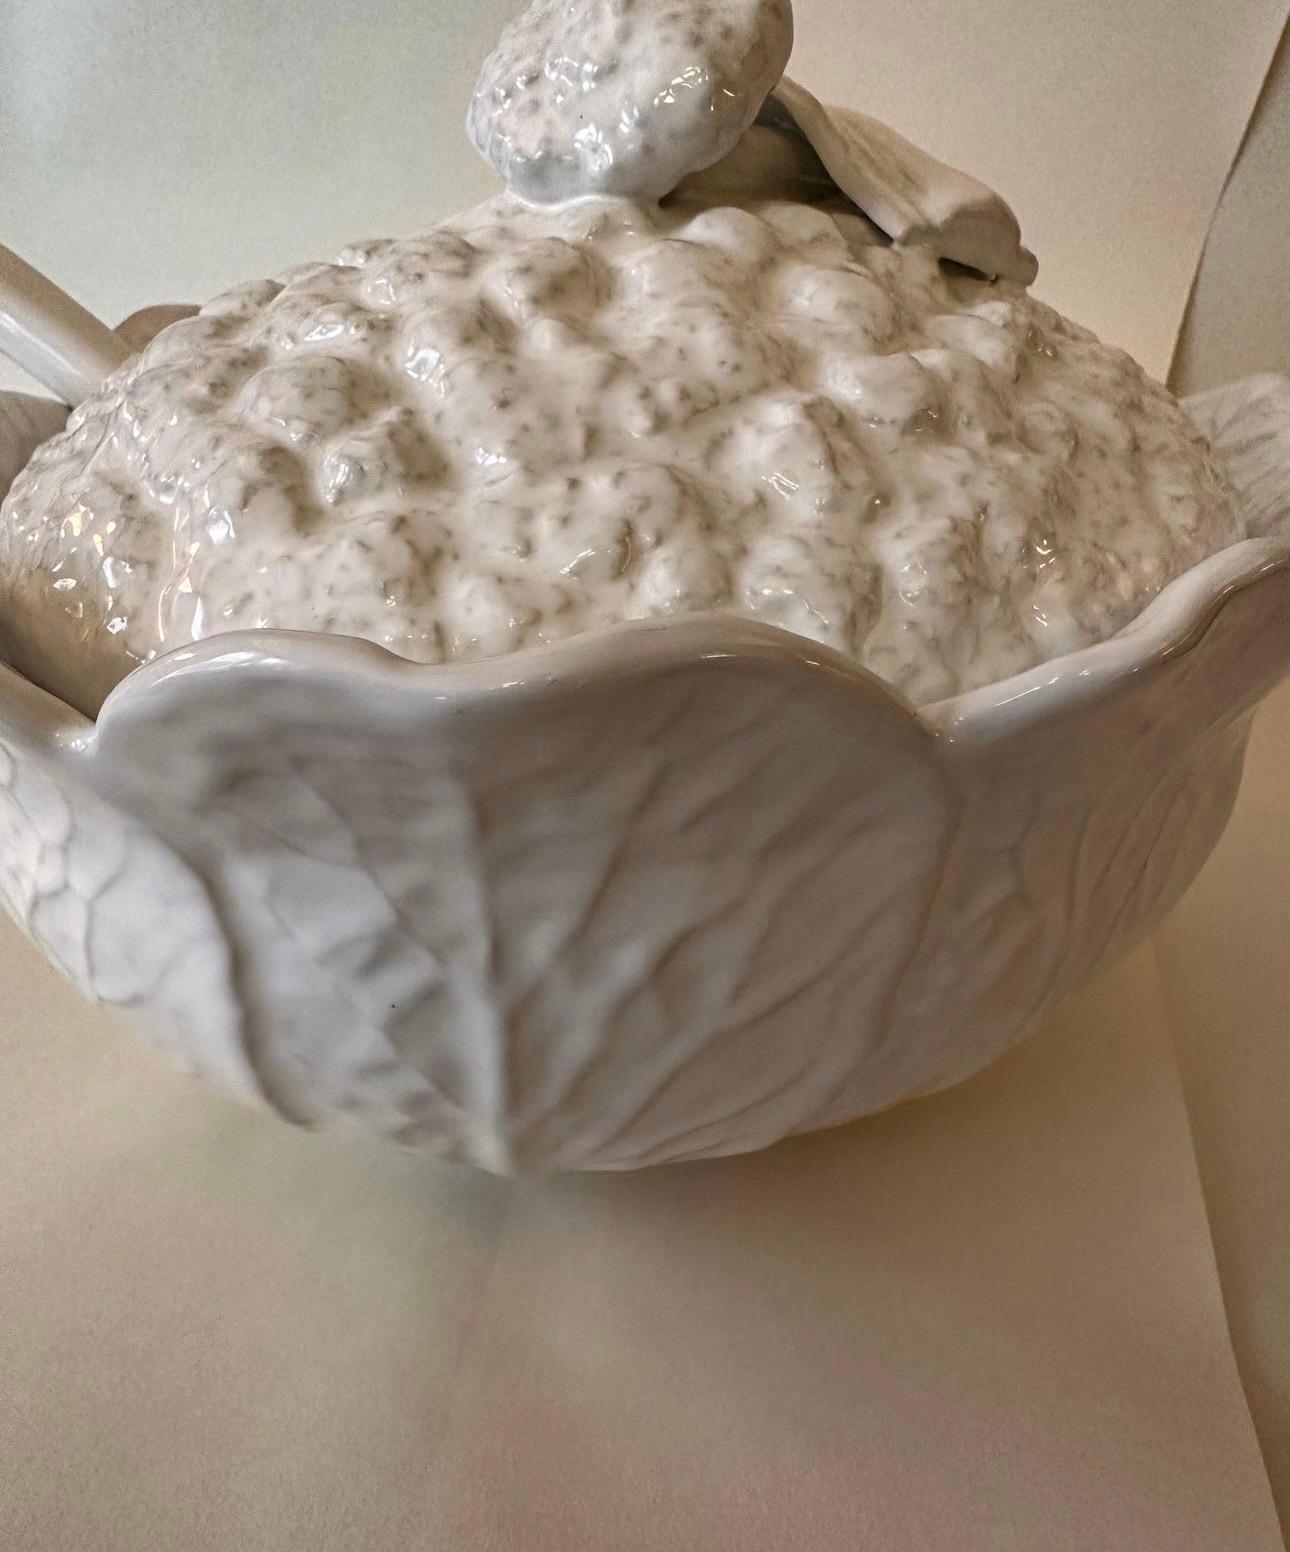 Vintage 1970s Made in Portugal Cauliflower Vegetable Soup Tureen With Ladle In Good Condition For Sale In Portage, MI